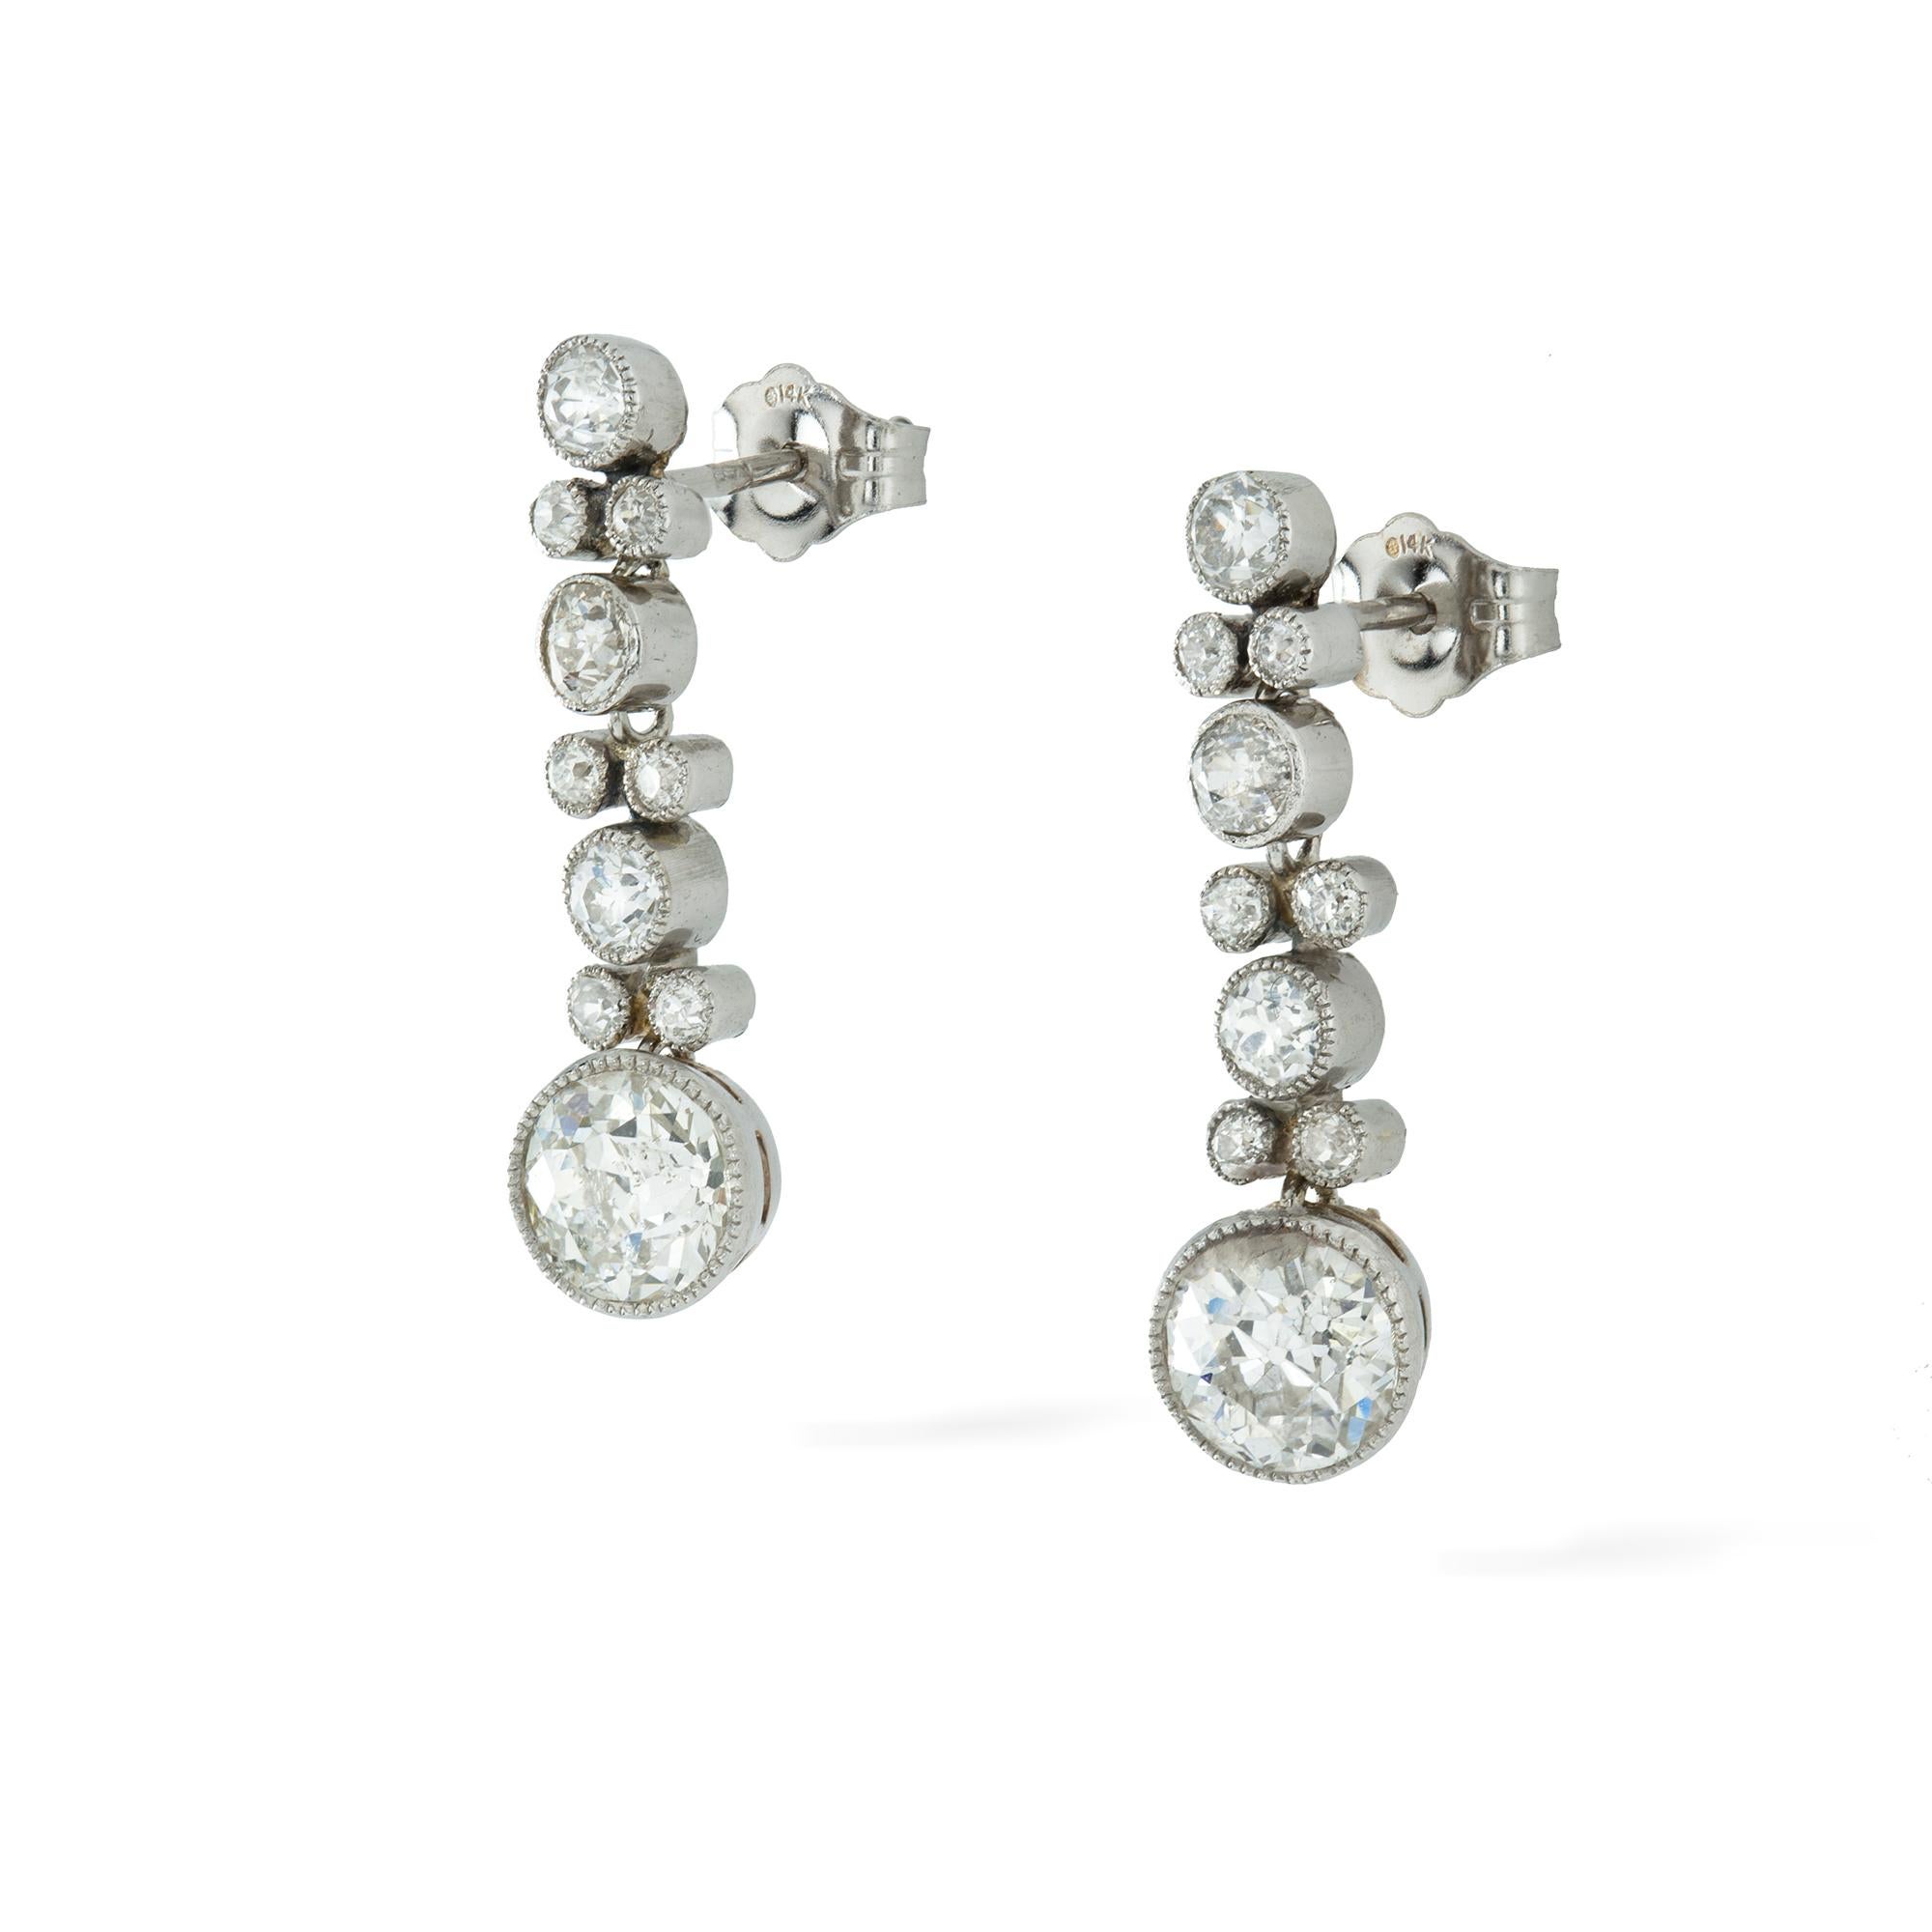 A pair of Edwardian diamond drop earrings, the two main old-cut diamonds weighing approximately 0.75 carats each millgrain-set, suspending from an old-cut diamond set run consisting of alternating eighteen smaller diamonds weighing approximately a